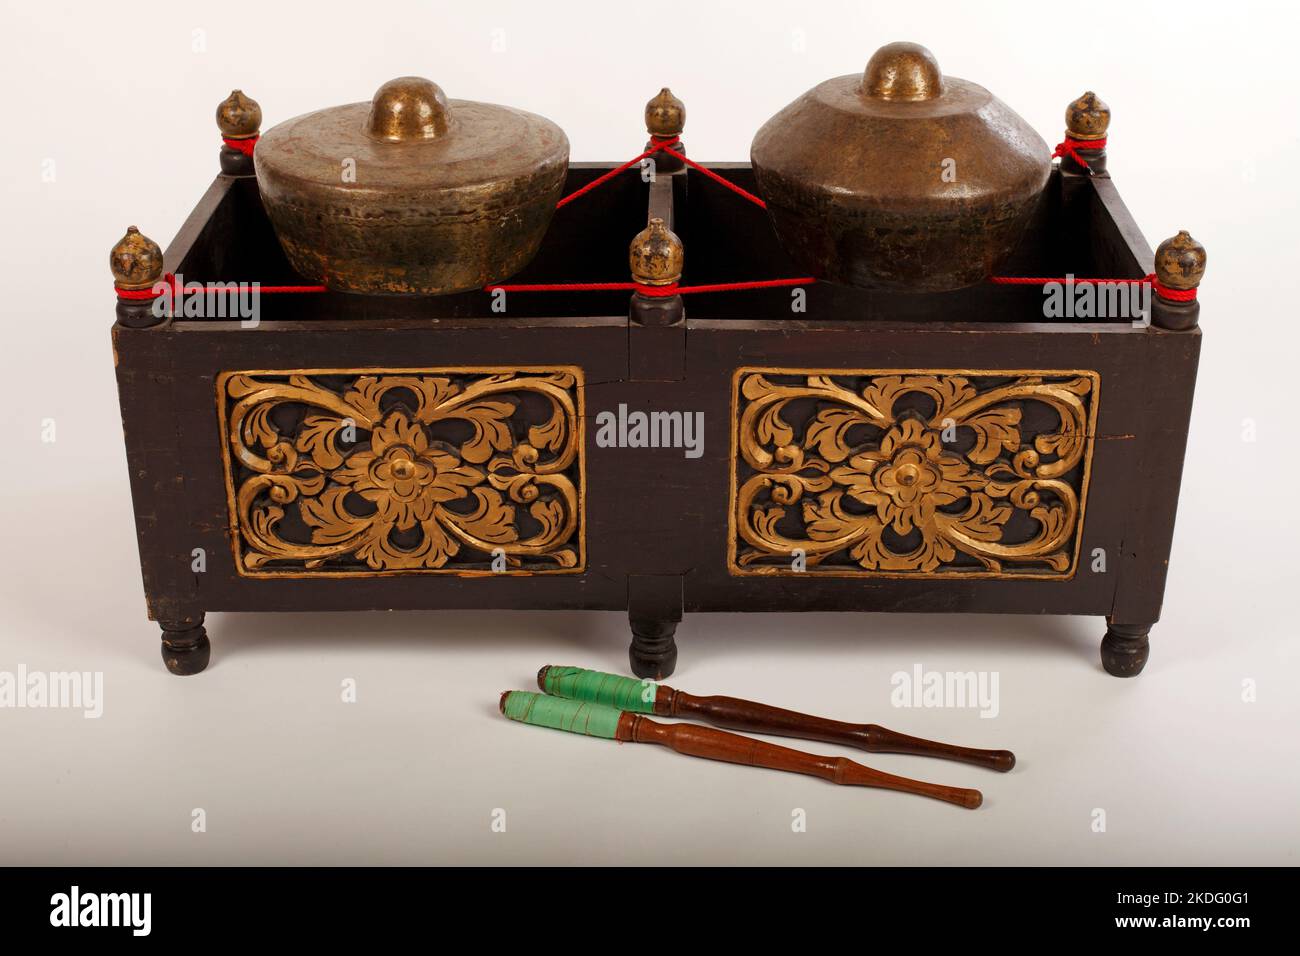 Bonang,  an Indonesian musical instrument used in the Javanese gamelan. Bronze gongs balanced on string with a decorative wooden frame. With beaters. Stock Photo